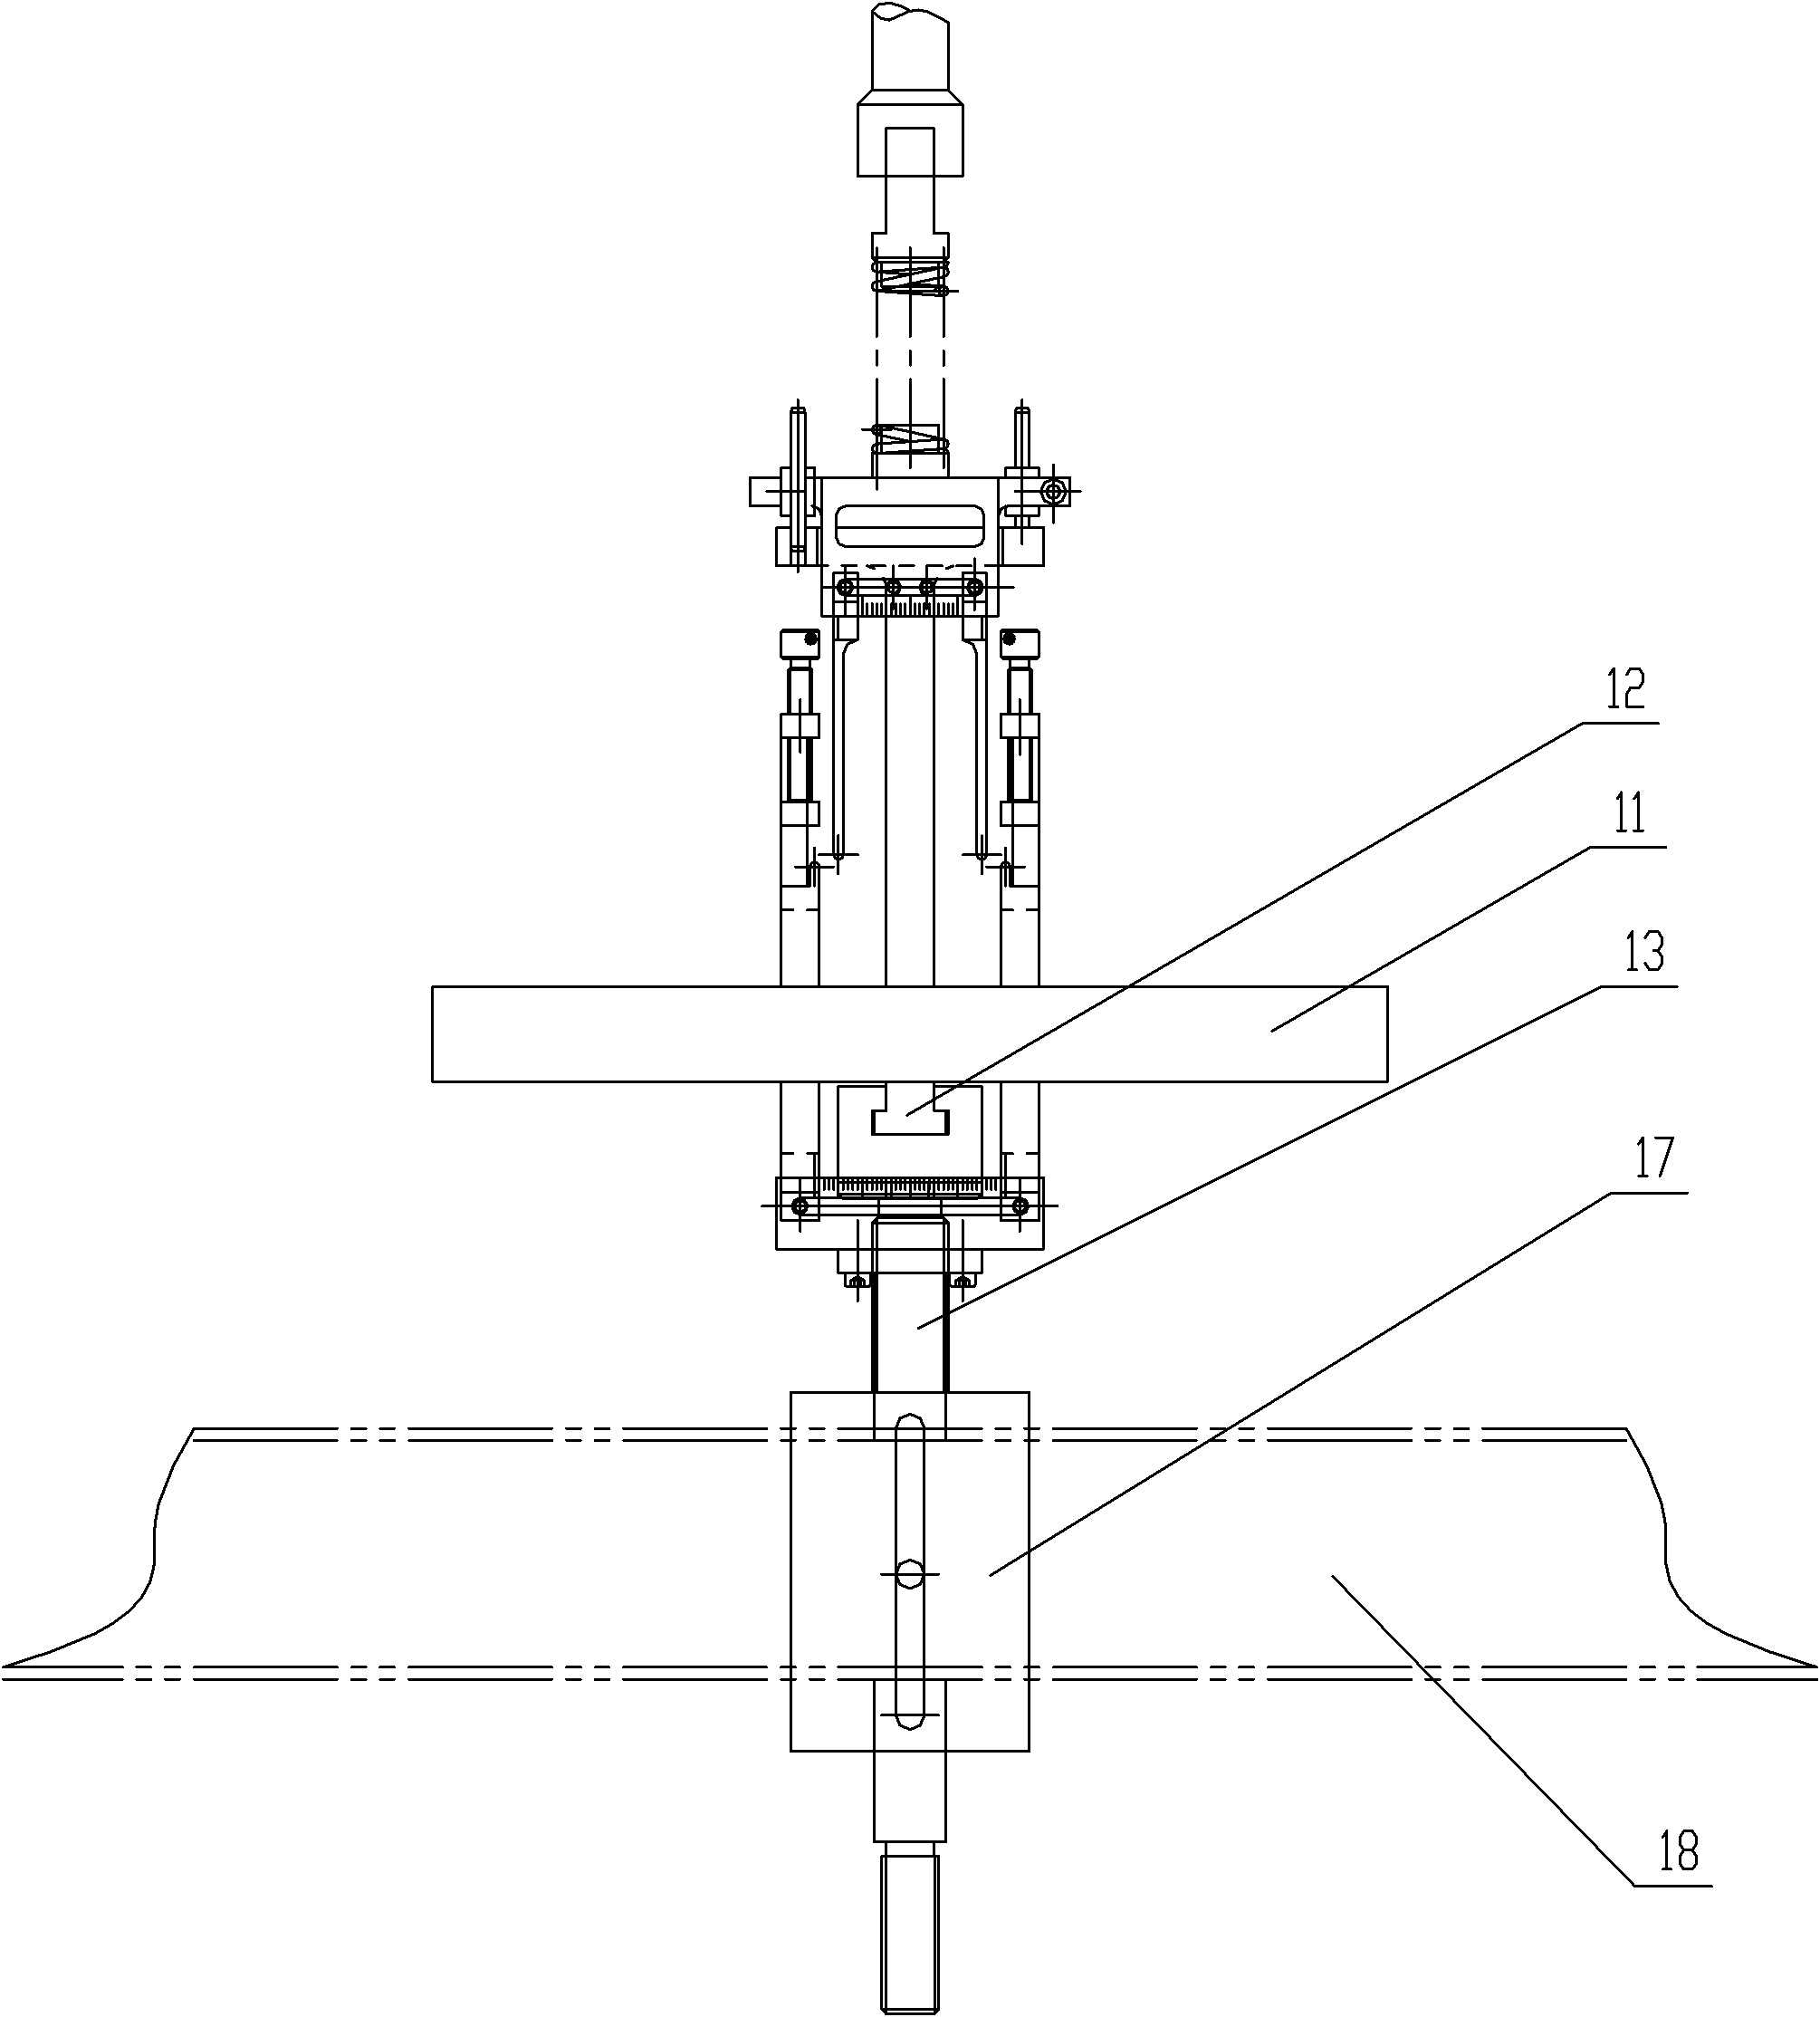 Three-point or four-point bending fatigue test fixture for living rat ulna